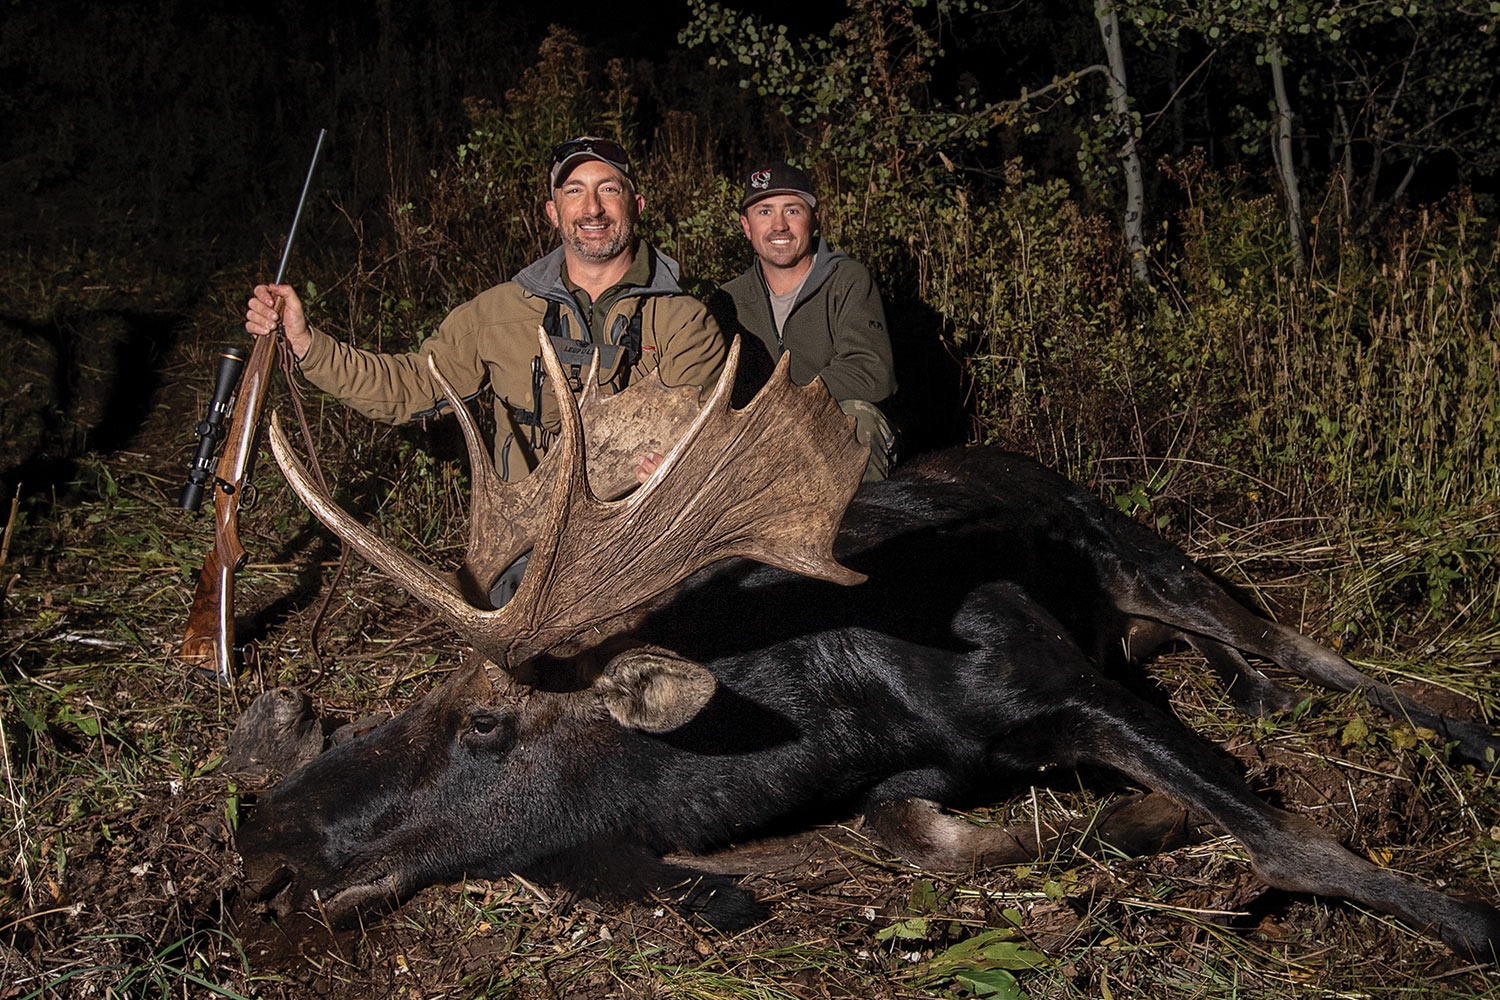 Hunter and guide pose with large moose.